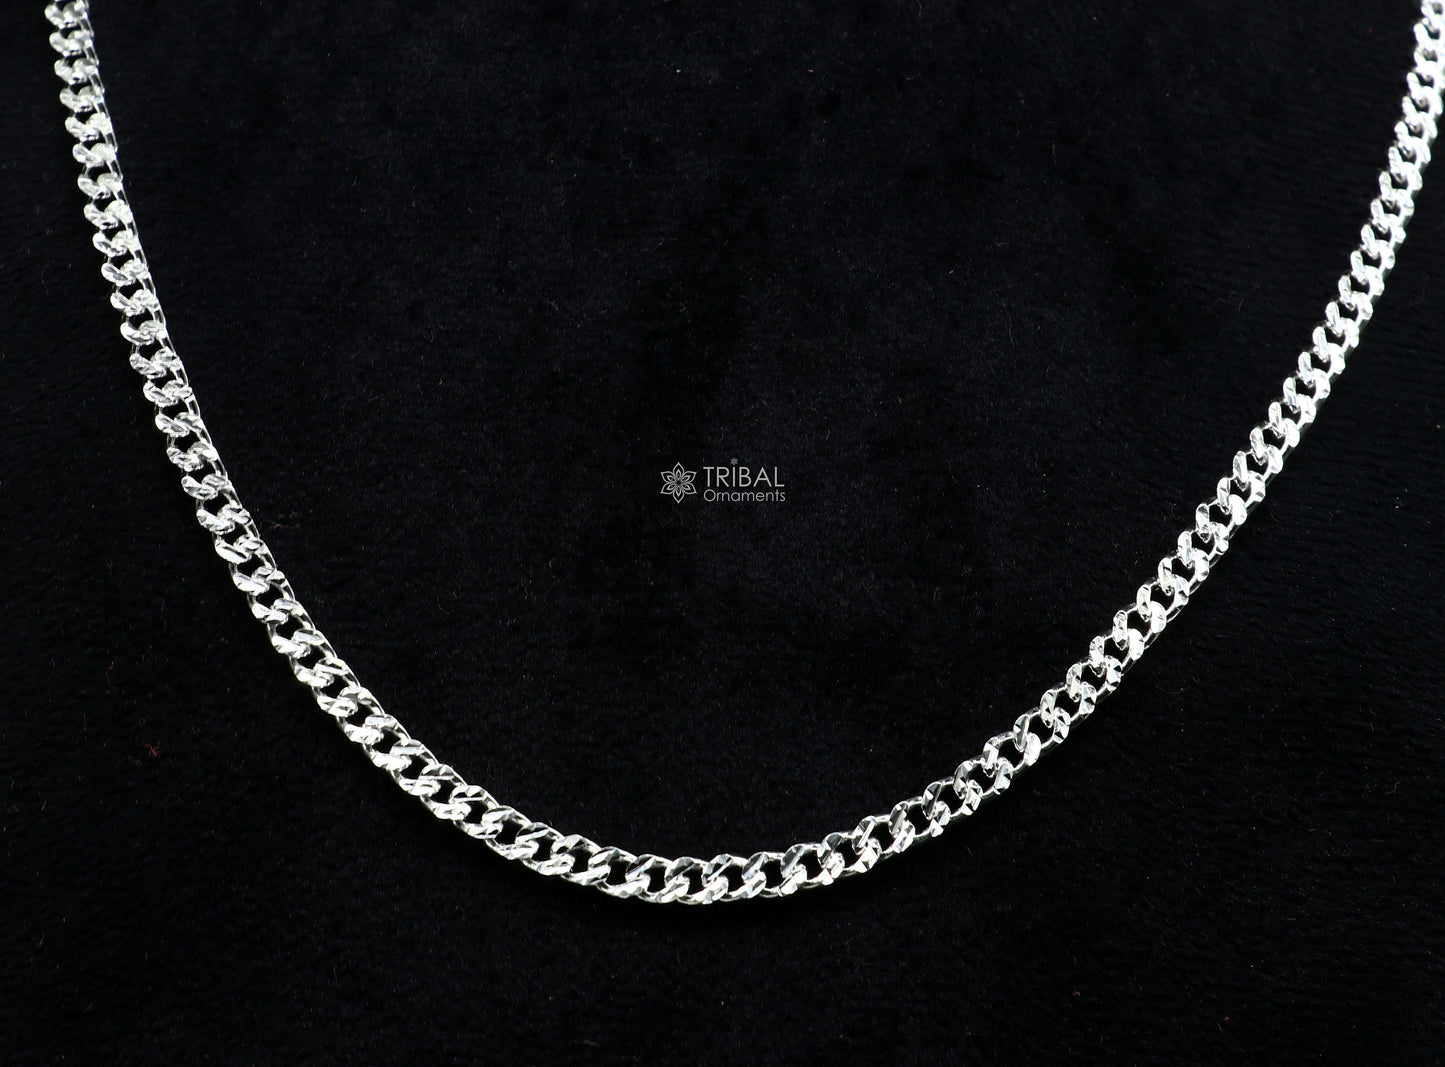 3mm 20" solid 925 sterling silver handmade modern trendy design wheat chain necklace giving it a distinctive and stylish look ch250 - TRIBAL ORNAMENTS